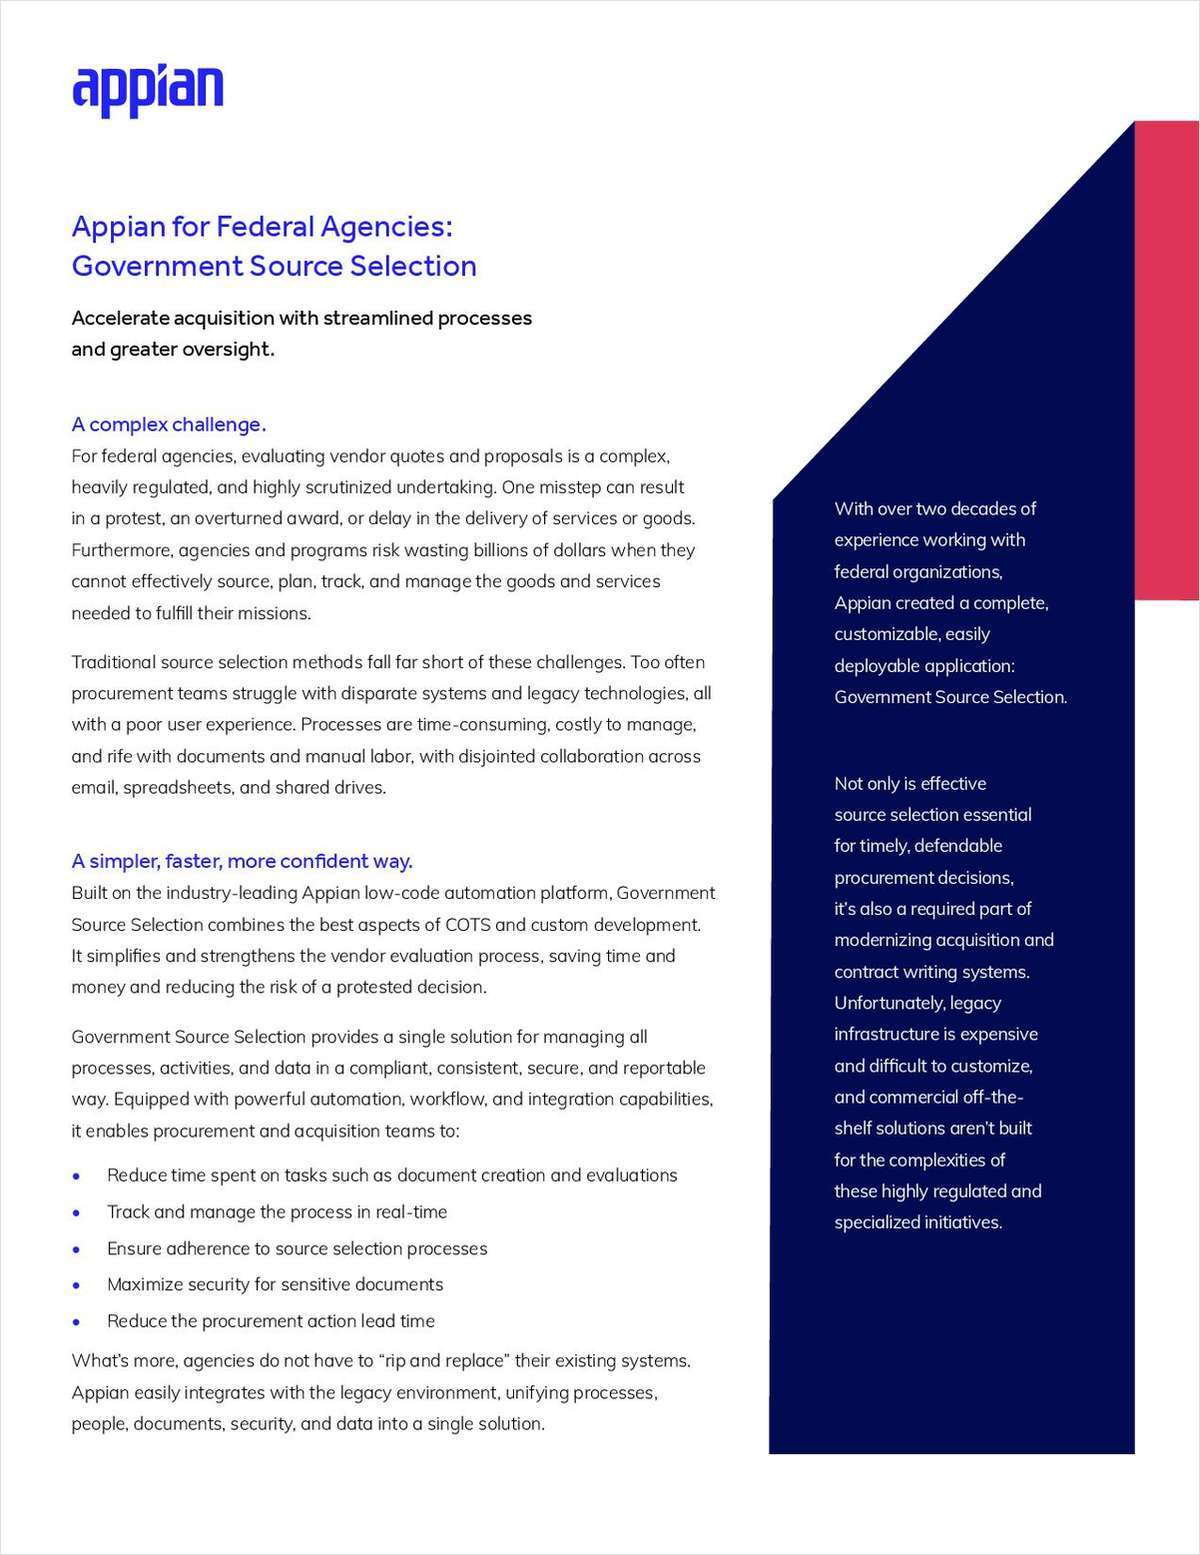 Appian for Federal Agencies: Government Source Selection